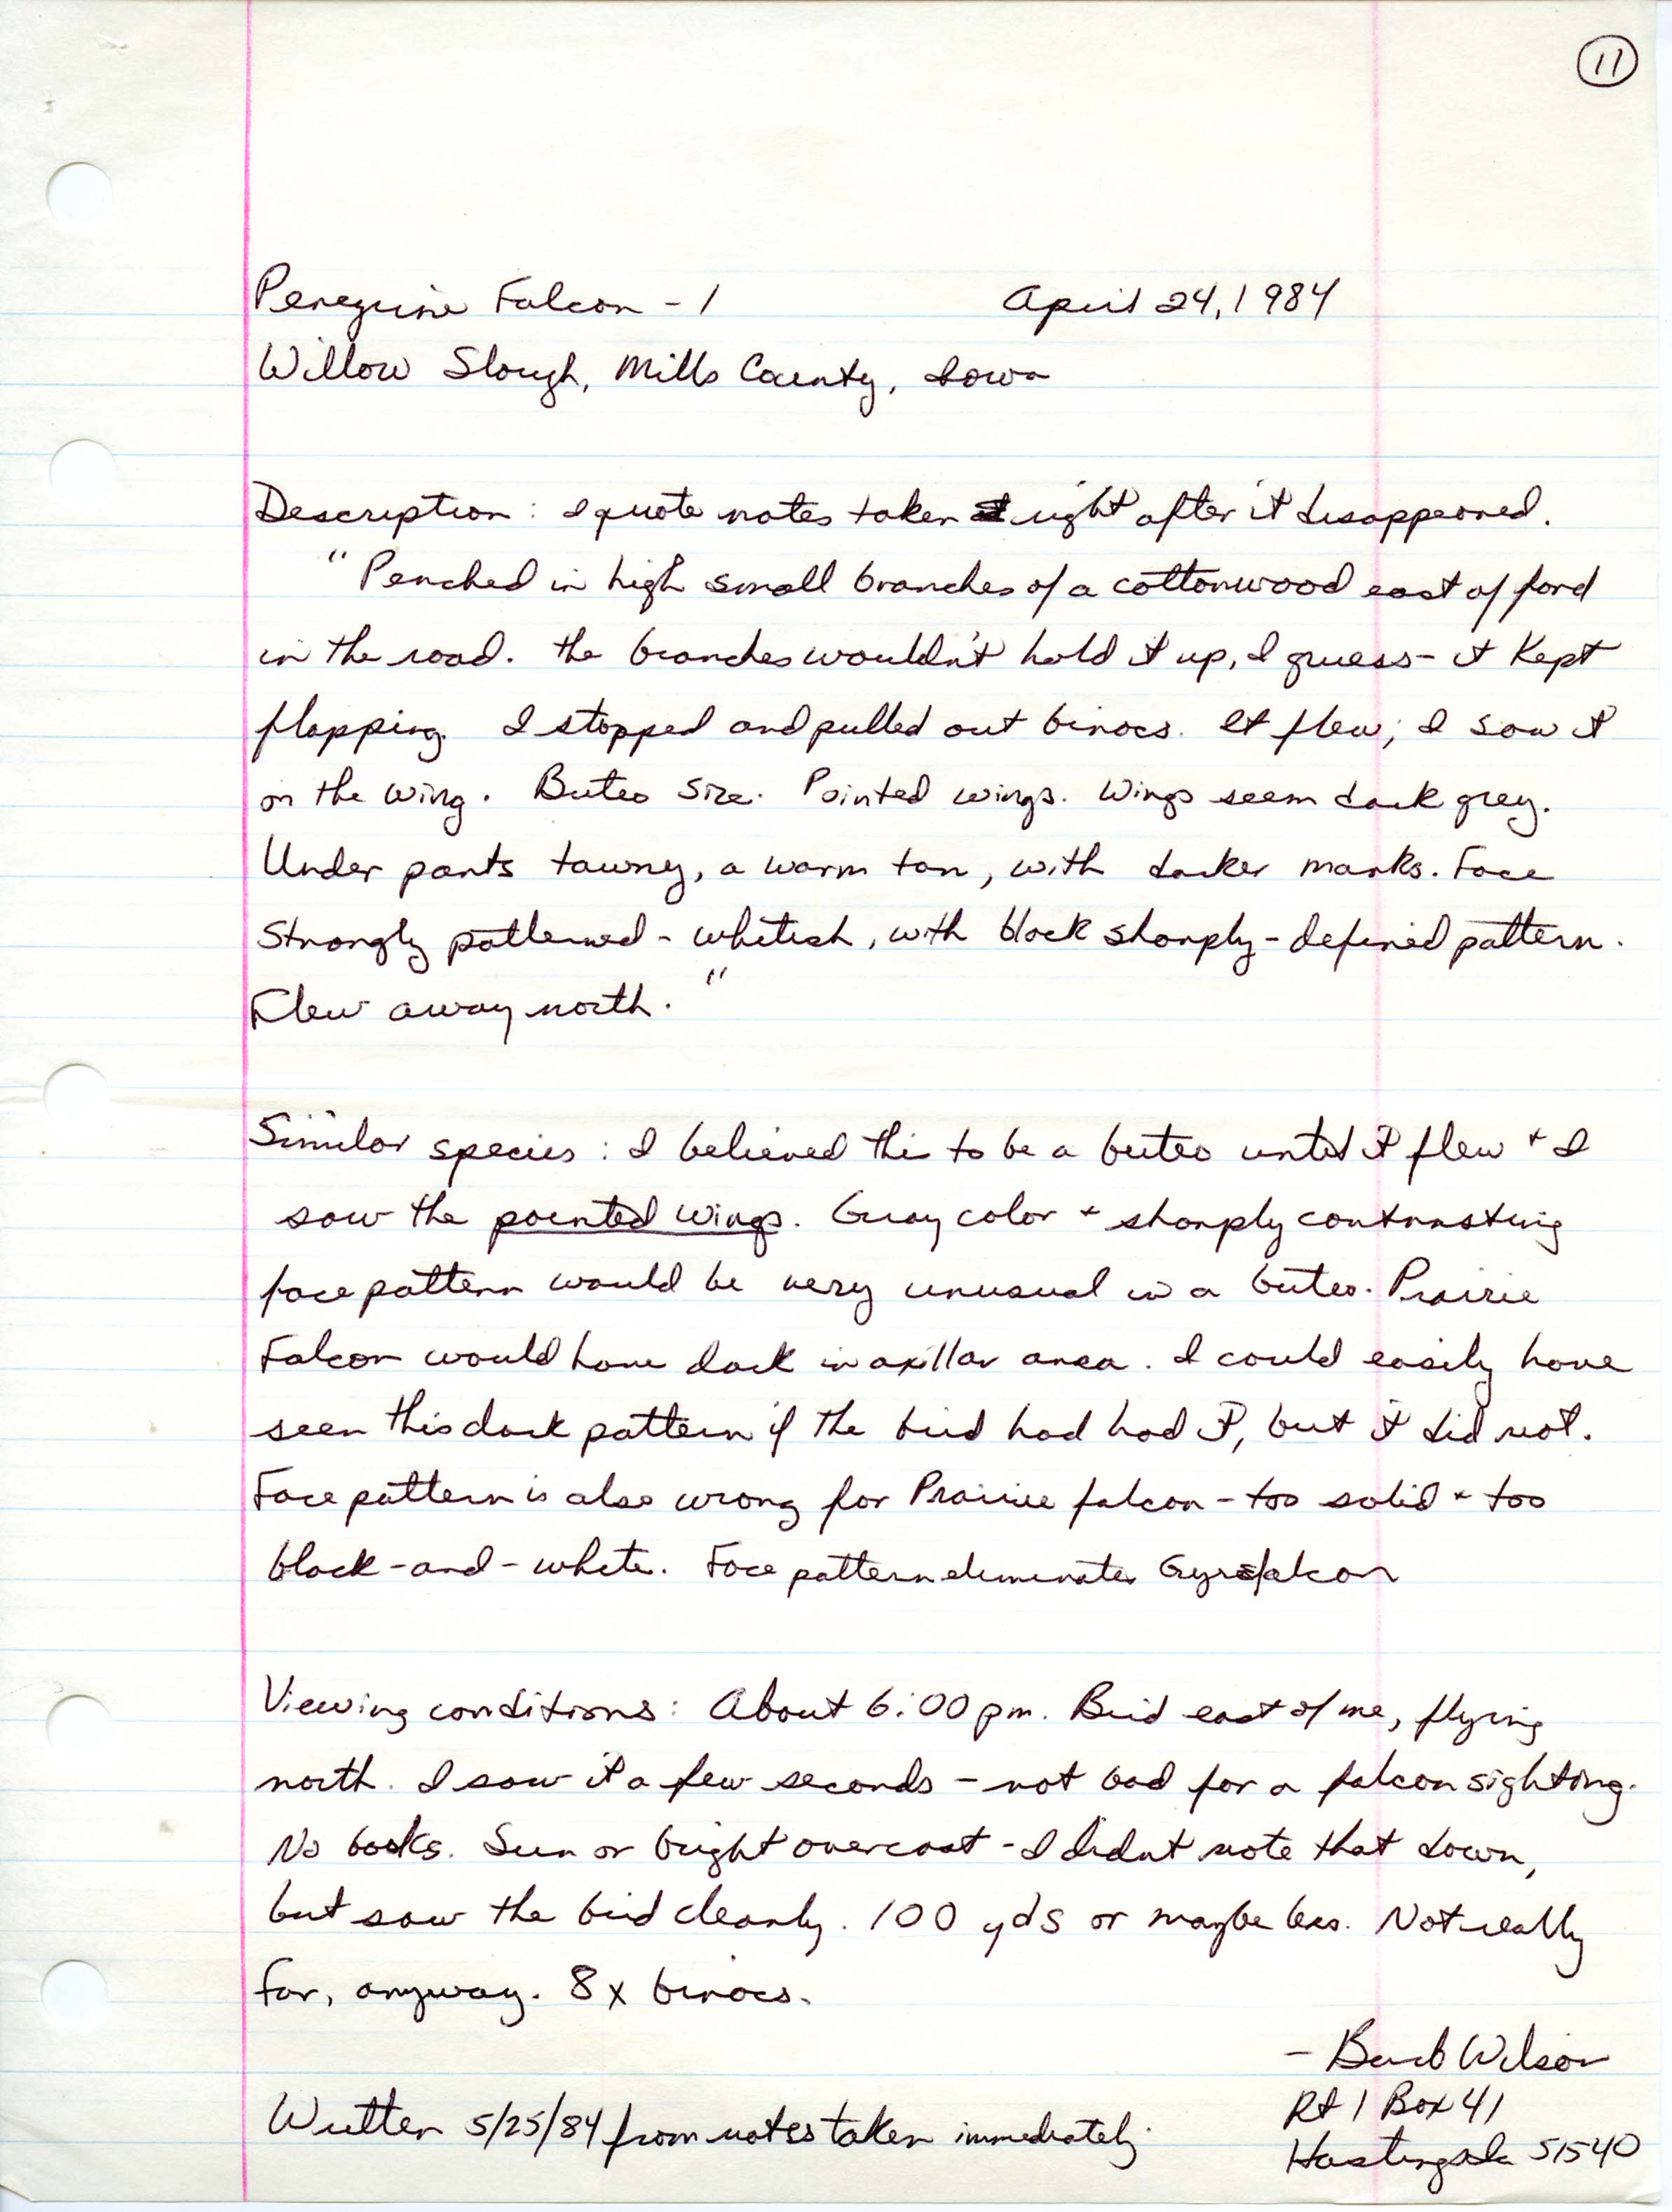 Rare bird documentation form for Peregrine Falcon at Willow Slough, 1984